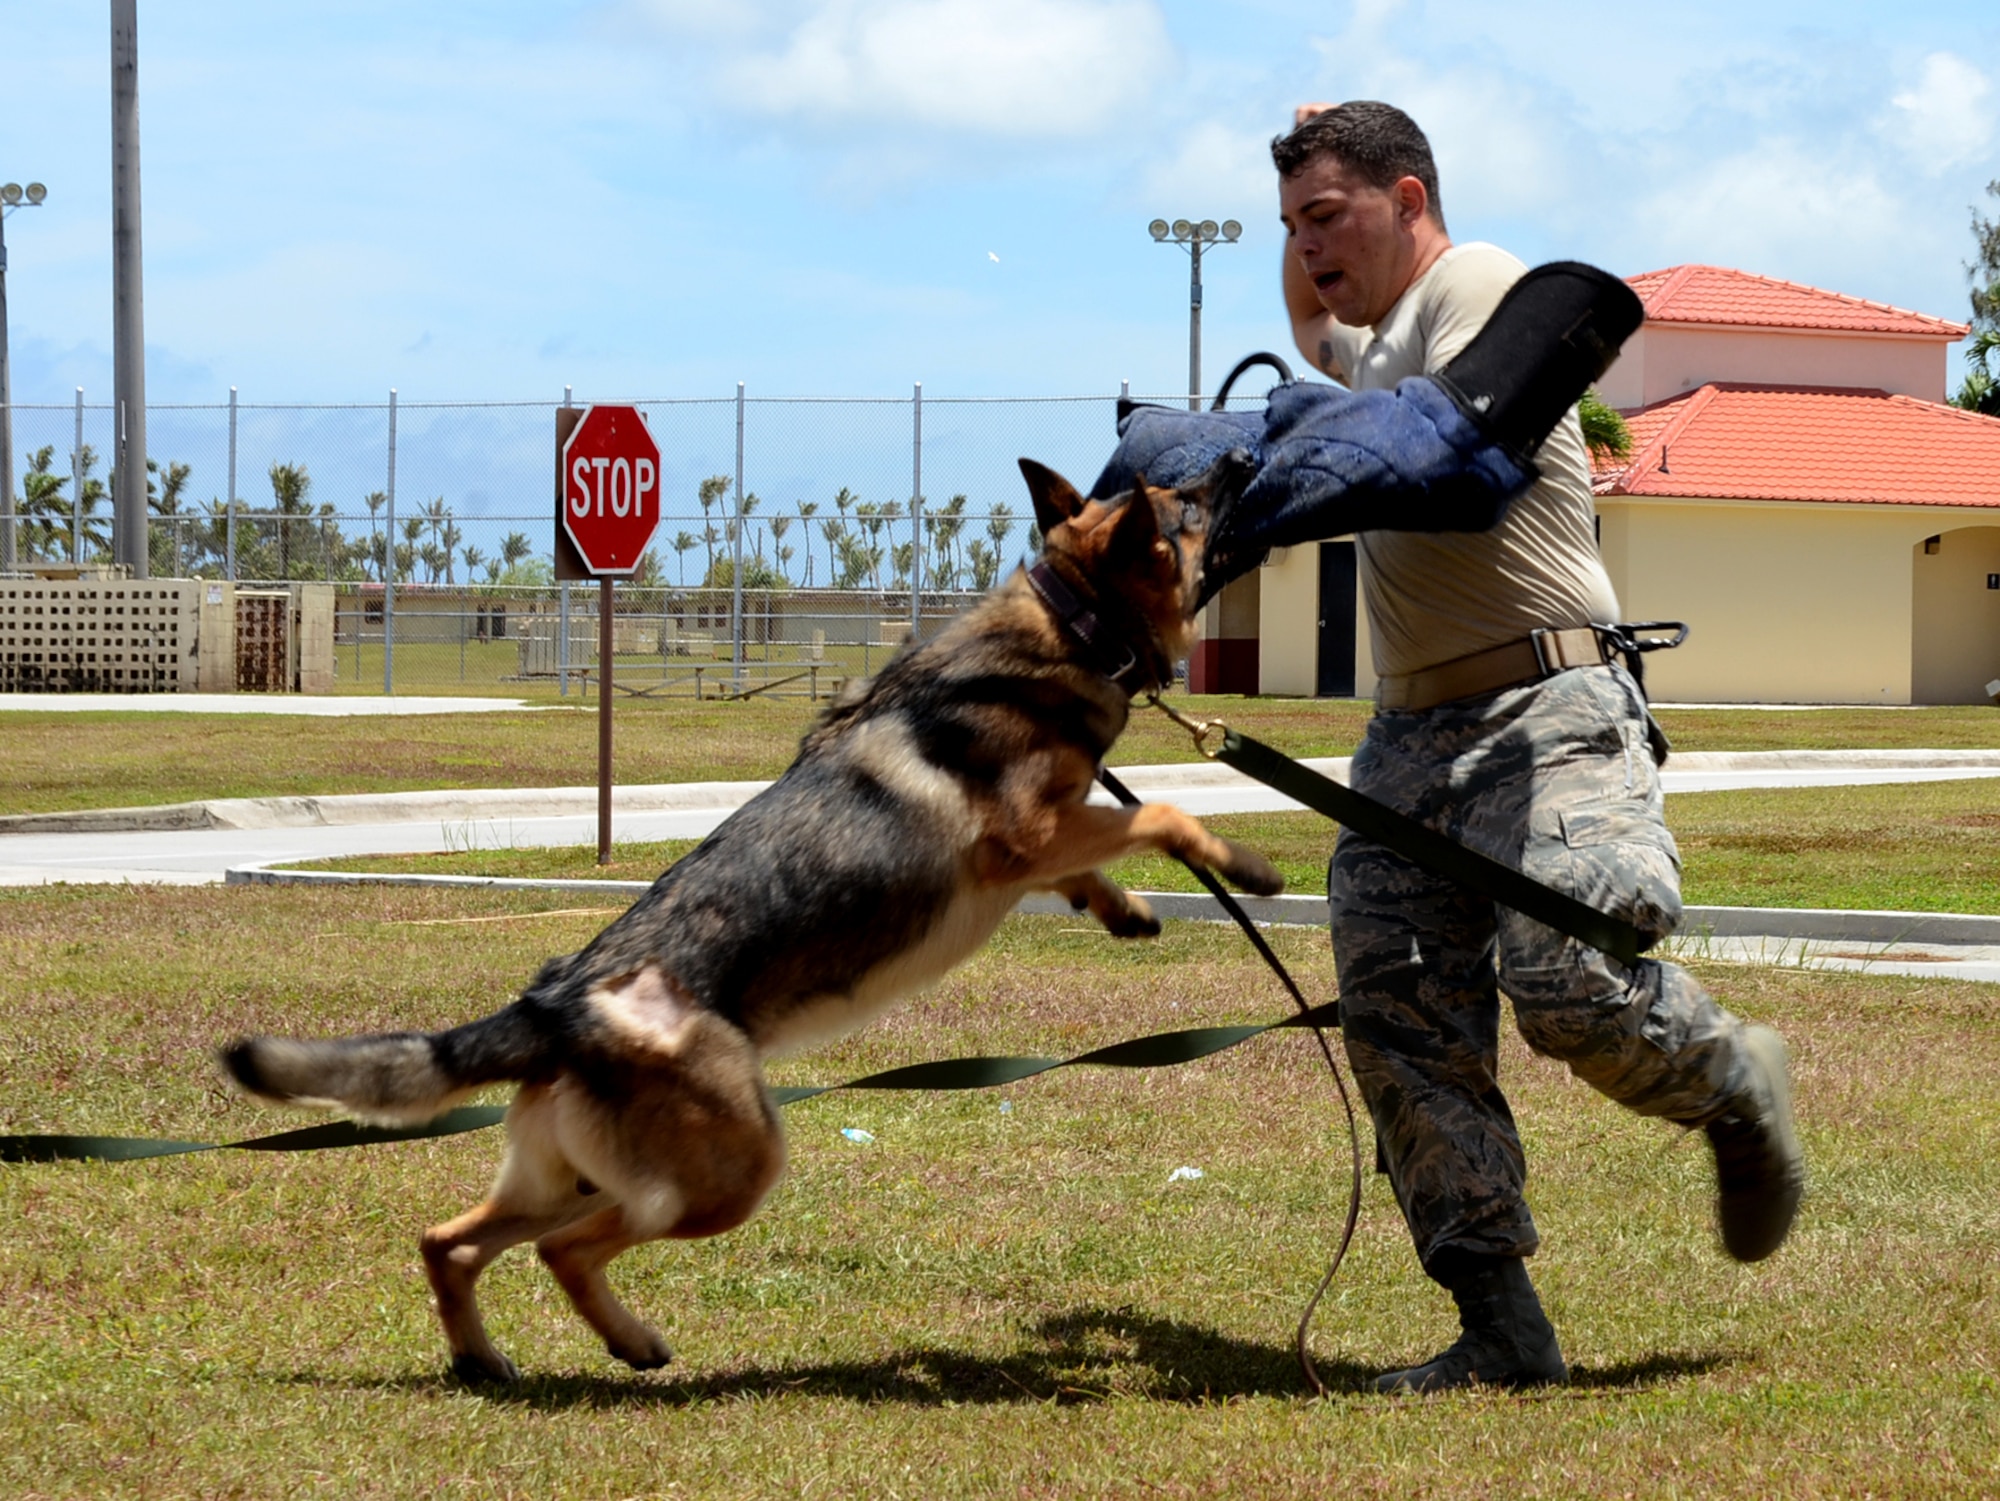 Staff Sgt. Miguel Novoa, 36th Security Forces working dog handler, mock-struggles against his military working dog, May 12, 2015, at Andersen Air Force Base, Guam. Security forces Airmen held the public MWD job-skills presentation in recognition of National Police Week. (U.S. Air Force photo by Airman 1st Class Alexa Ann Henderson/Released)